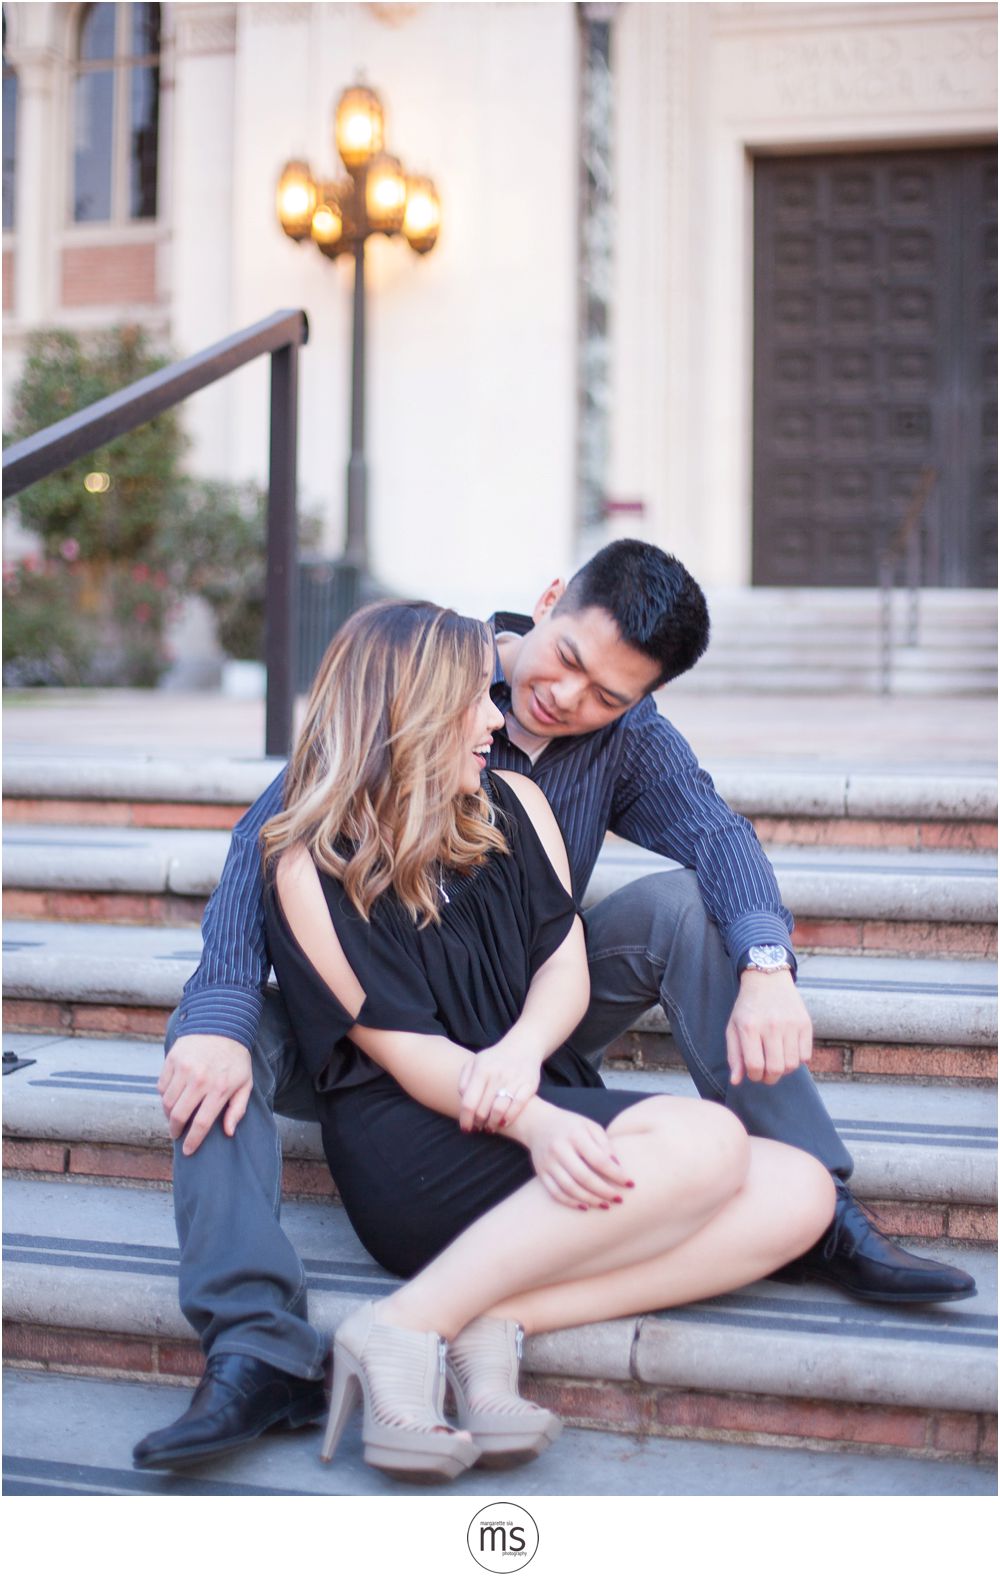 Vincent & Kami's Proposal Story at USC Margarette Sia Photography_0033